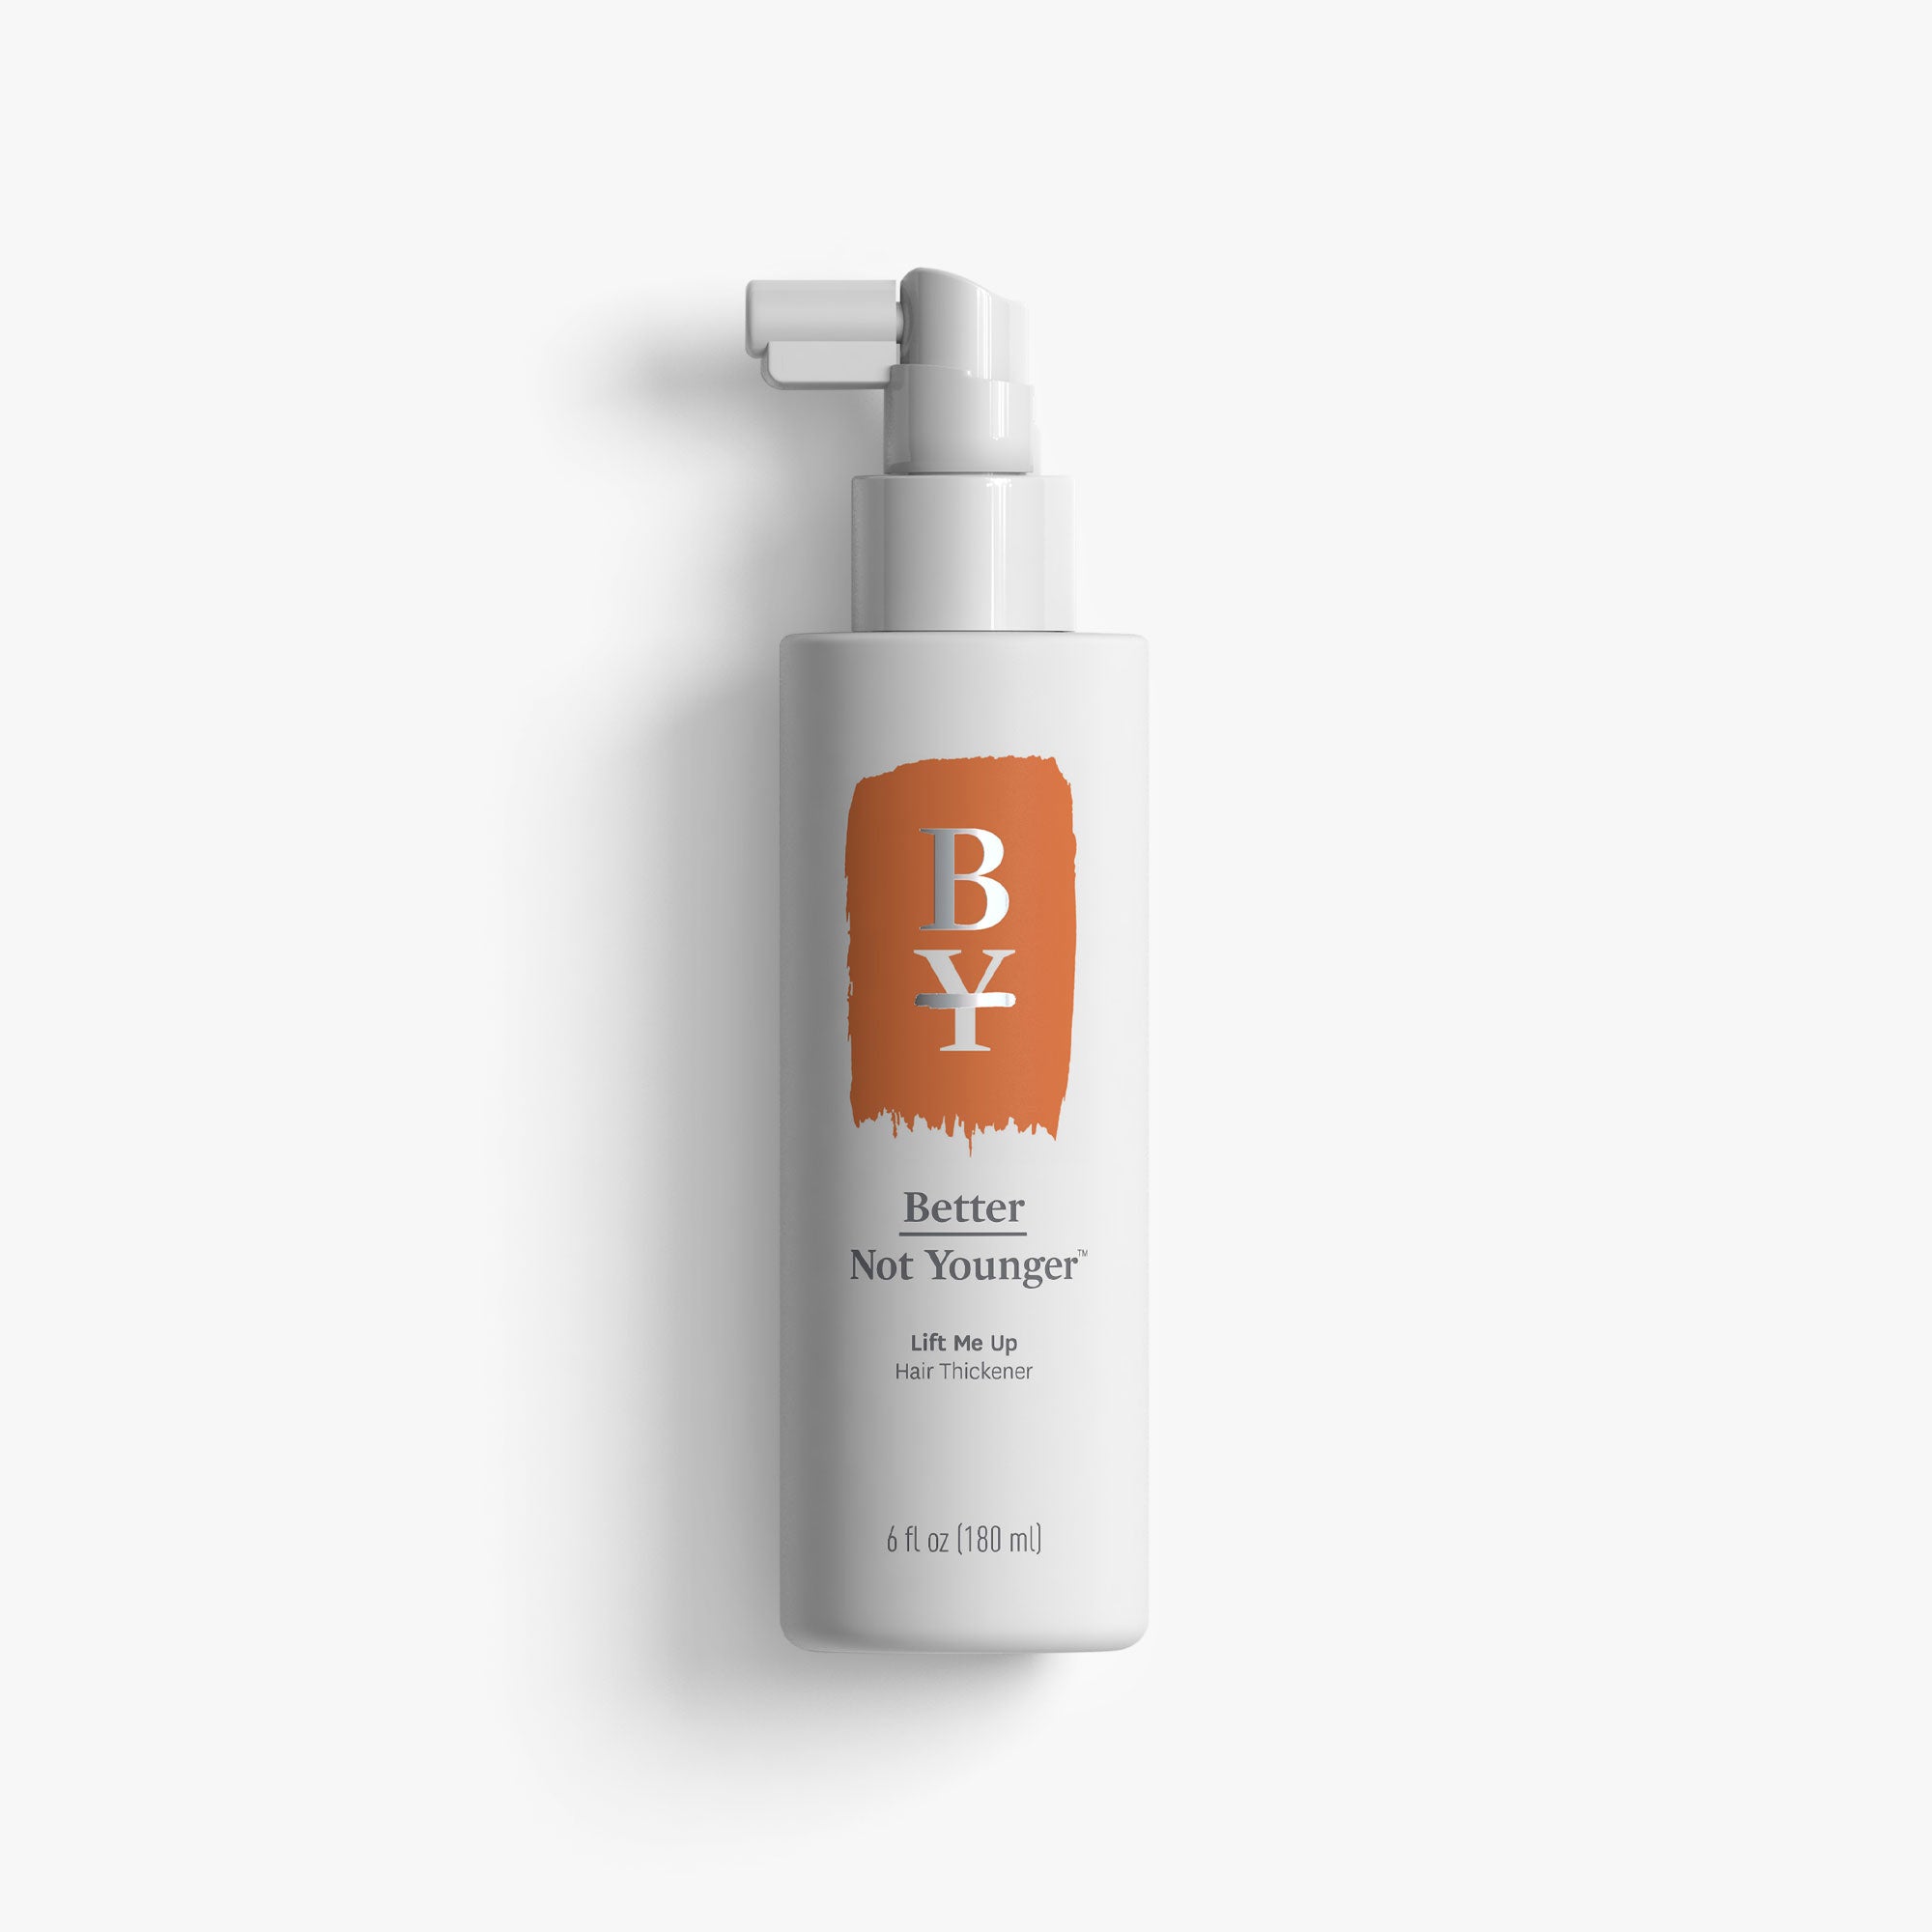 Lift Me Up: Hair Thickener